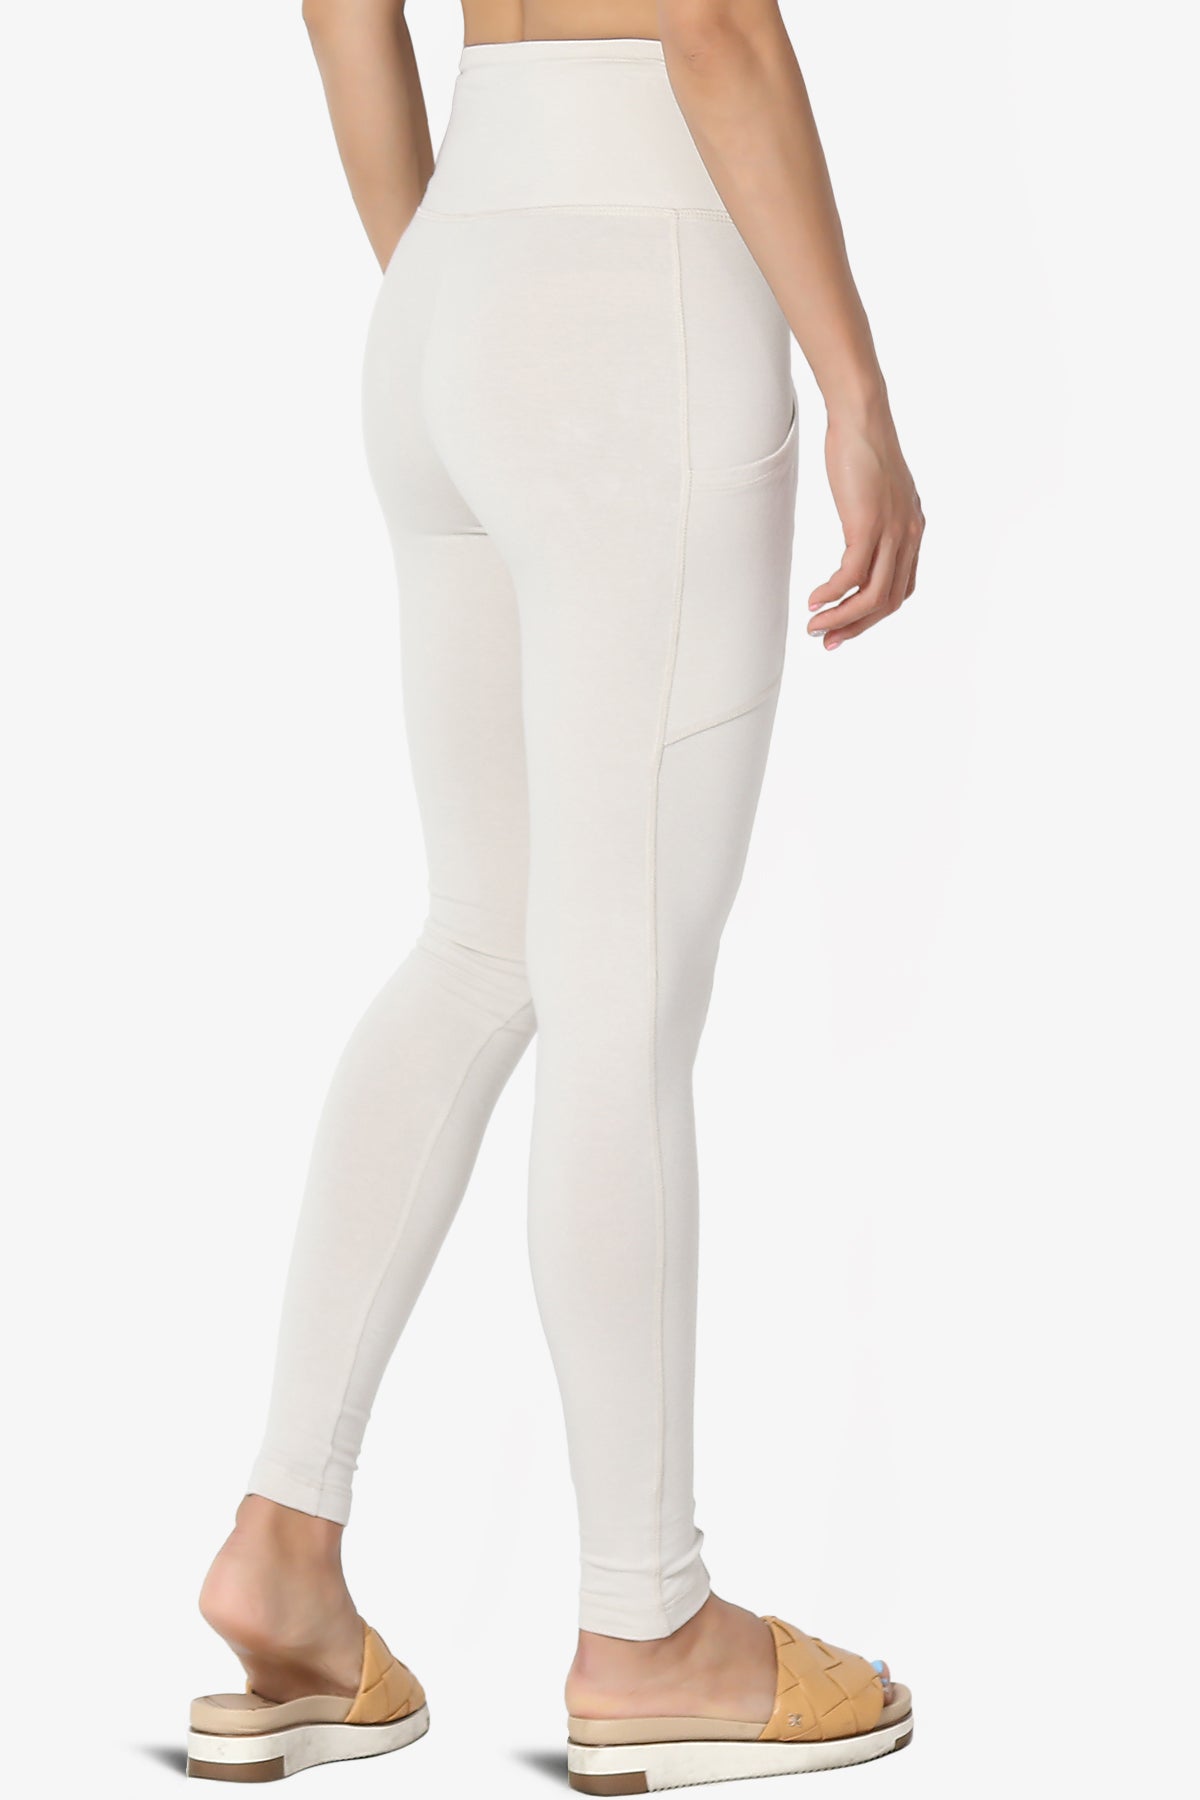 Ansley Luxe Cotton Leggings with Pockets BONE_4